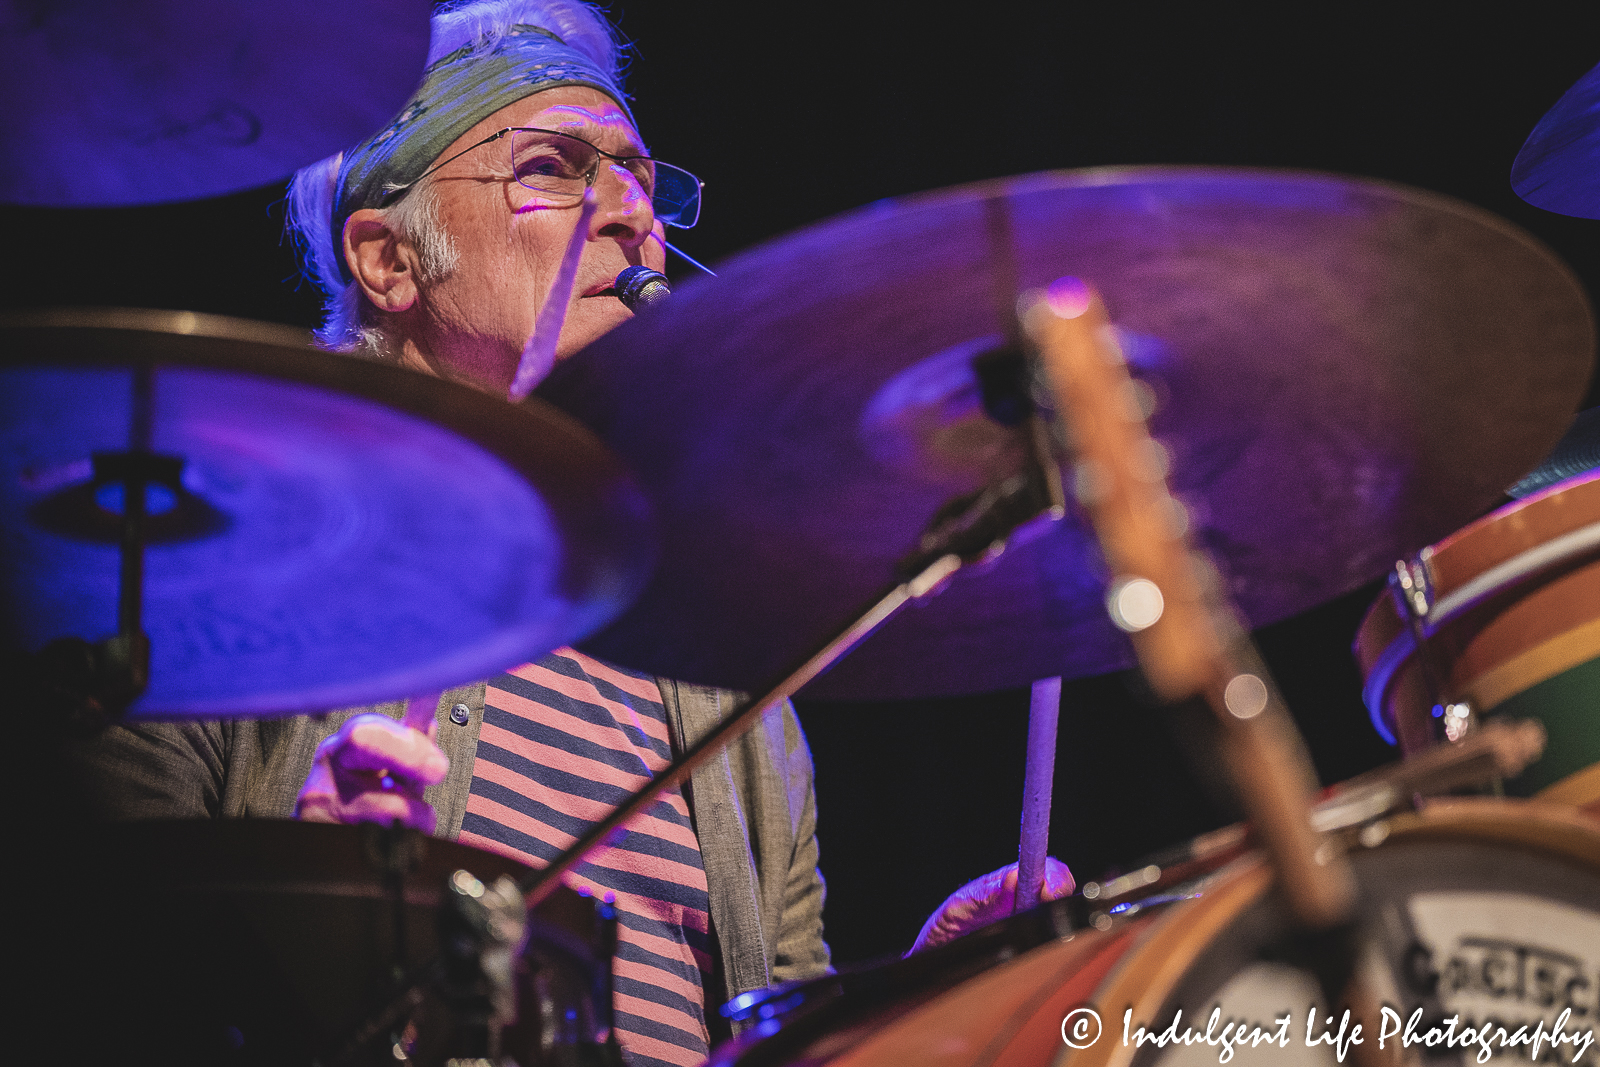 Drummer Jimmie Fadden of Nitty Gritty Dirt Band live in concert at Star Pavilion inside of Ameristar Casino in Kansas City, MO on July 8, 2023.